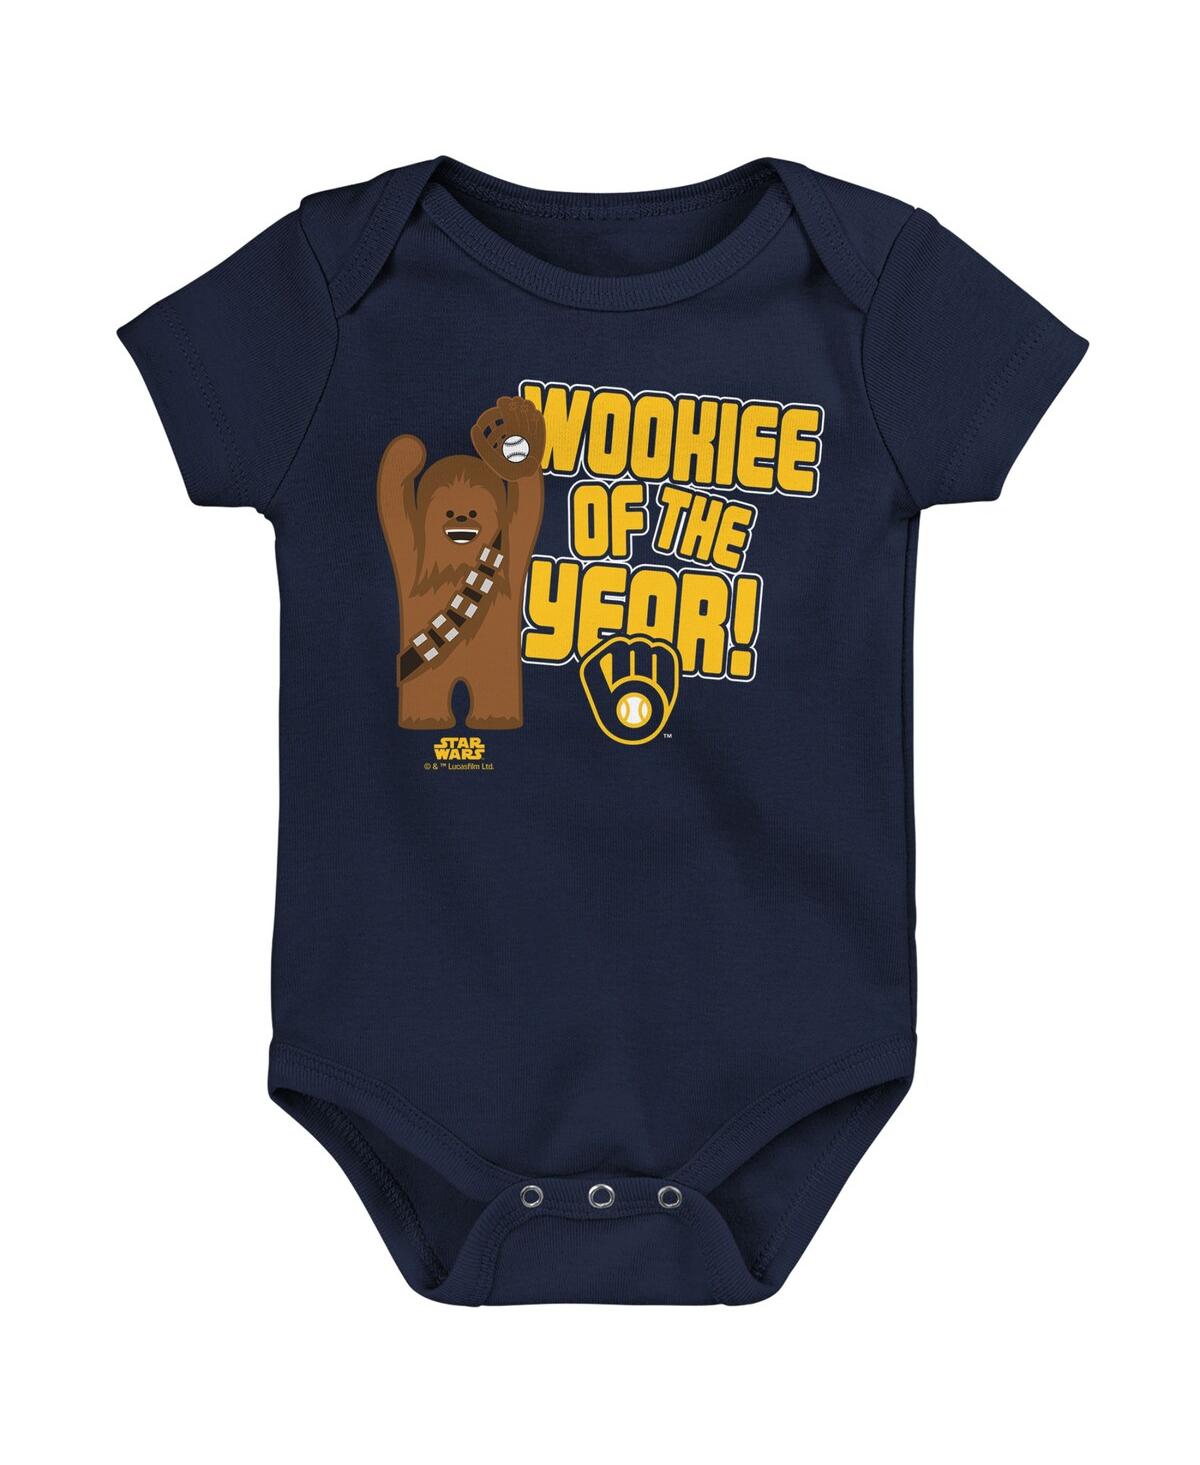 Outerstuff Babies' Newborn And Infant Boys And Girls Navy Milwaukee Brewers Star Wars Wookie Of The Year Bodysuit In Black